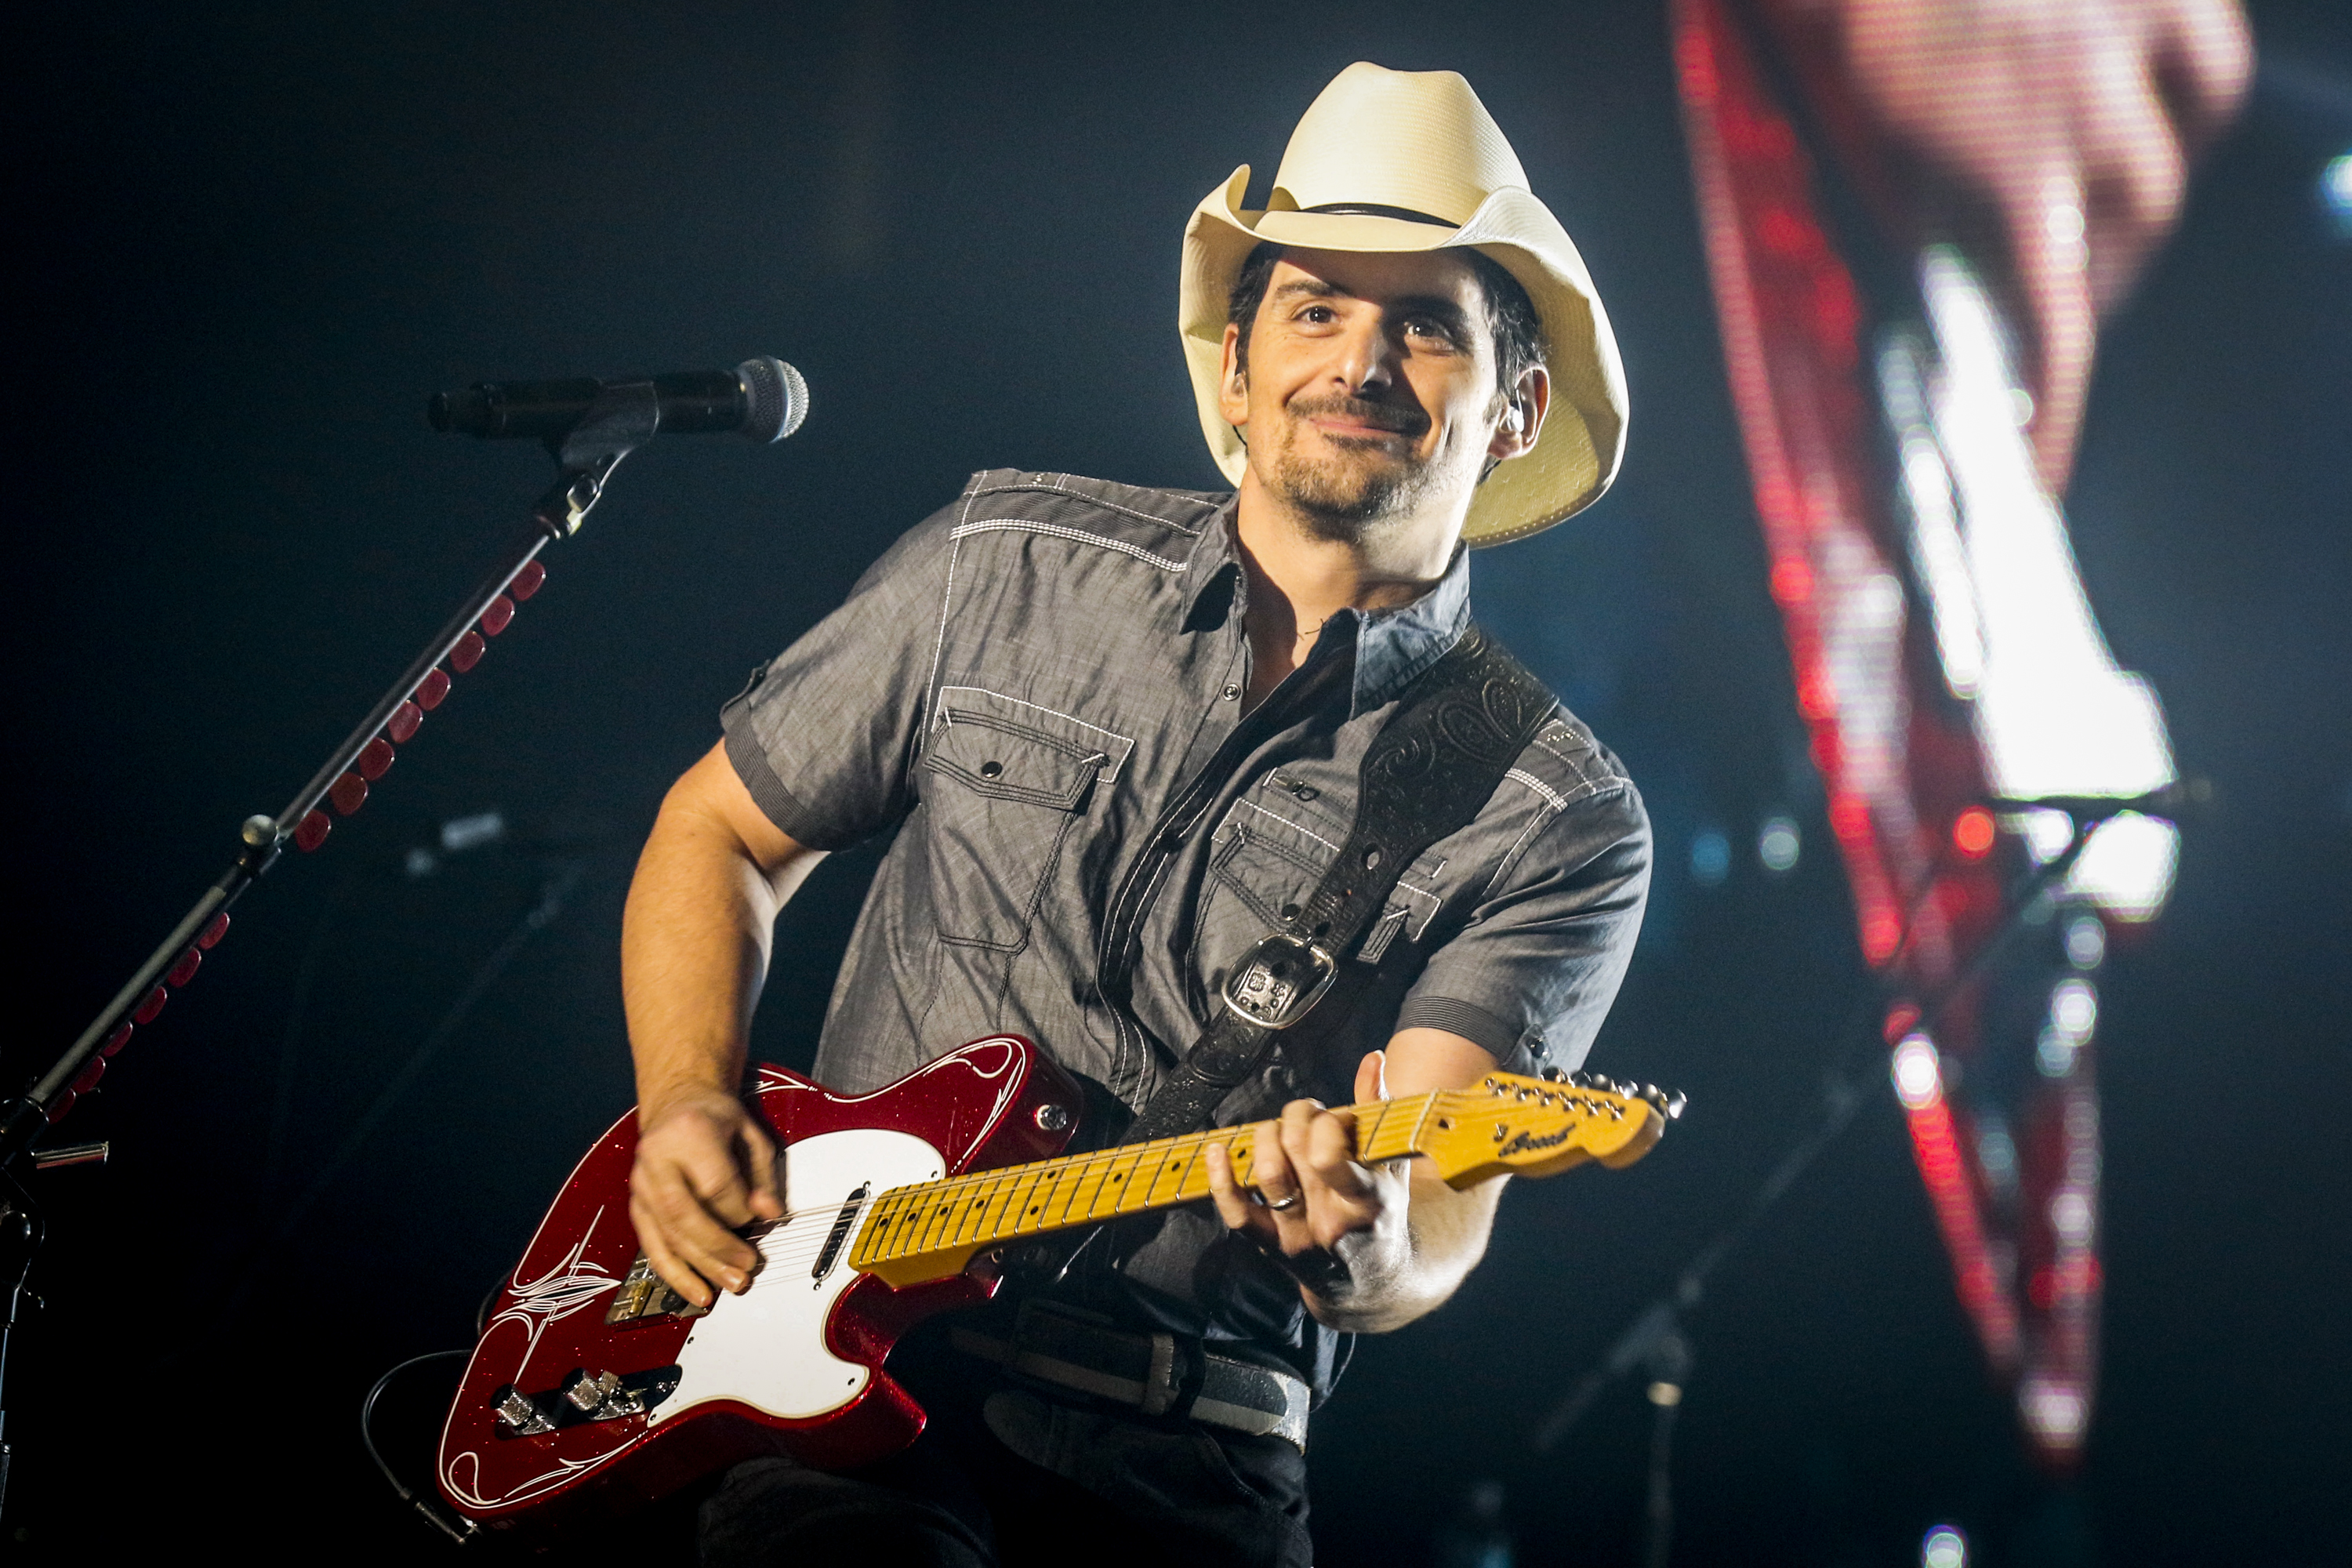 Brad Paisley performs live at the K-Rock Centre on Nov. 15, 2014 in Kingston, Ontario, Canada. (Mark Horton—WireImage)